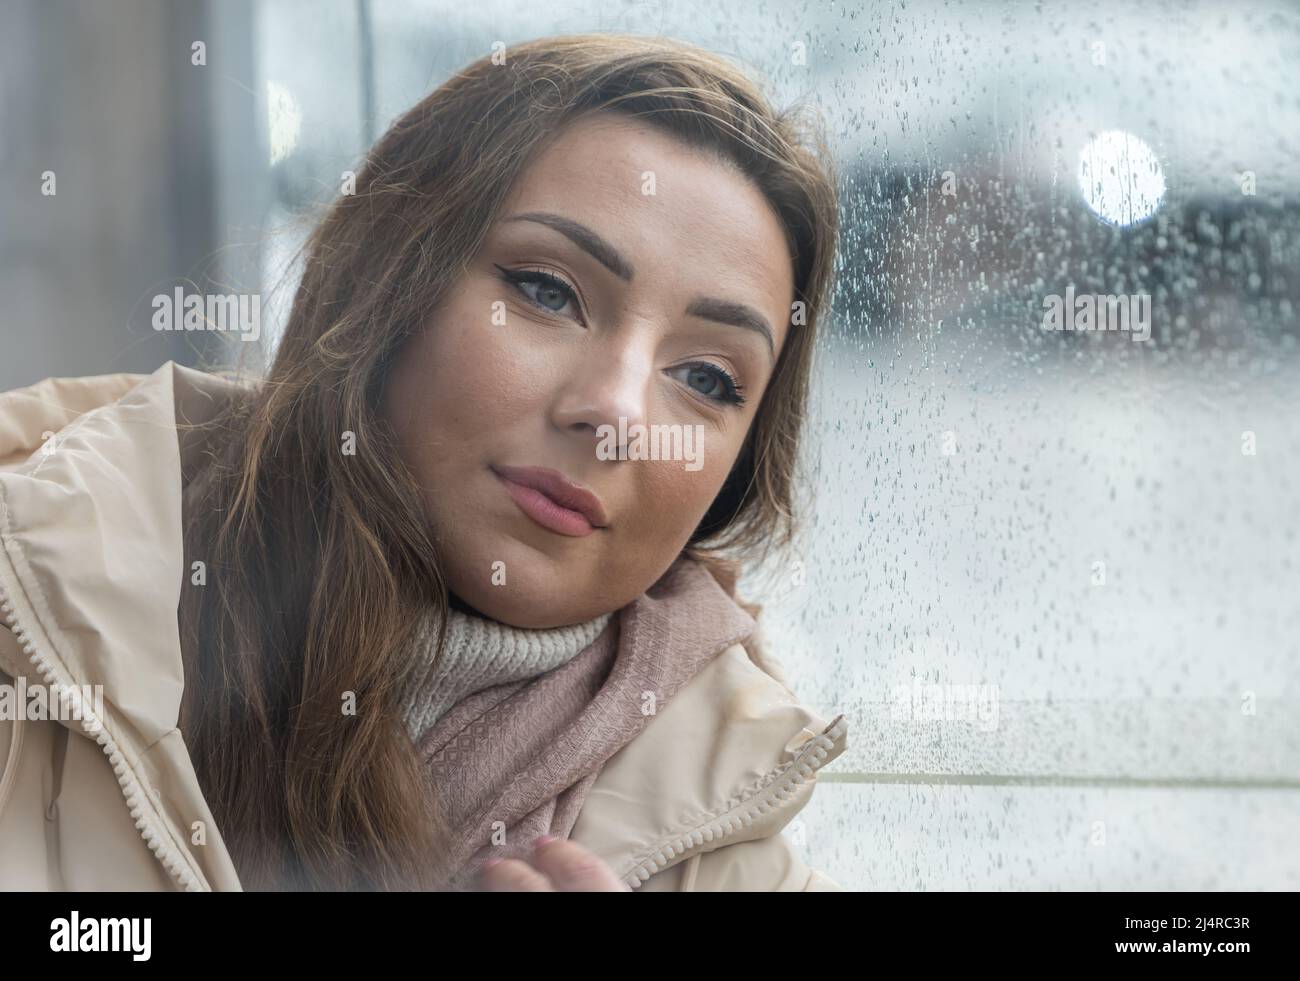 A pretty young woman or model waiting wistfully at a bus stop on a rainy day, Edinburgh, Scotland, UK Stock Photo